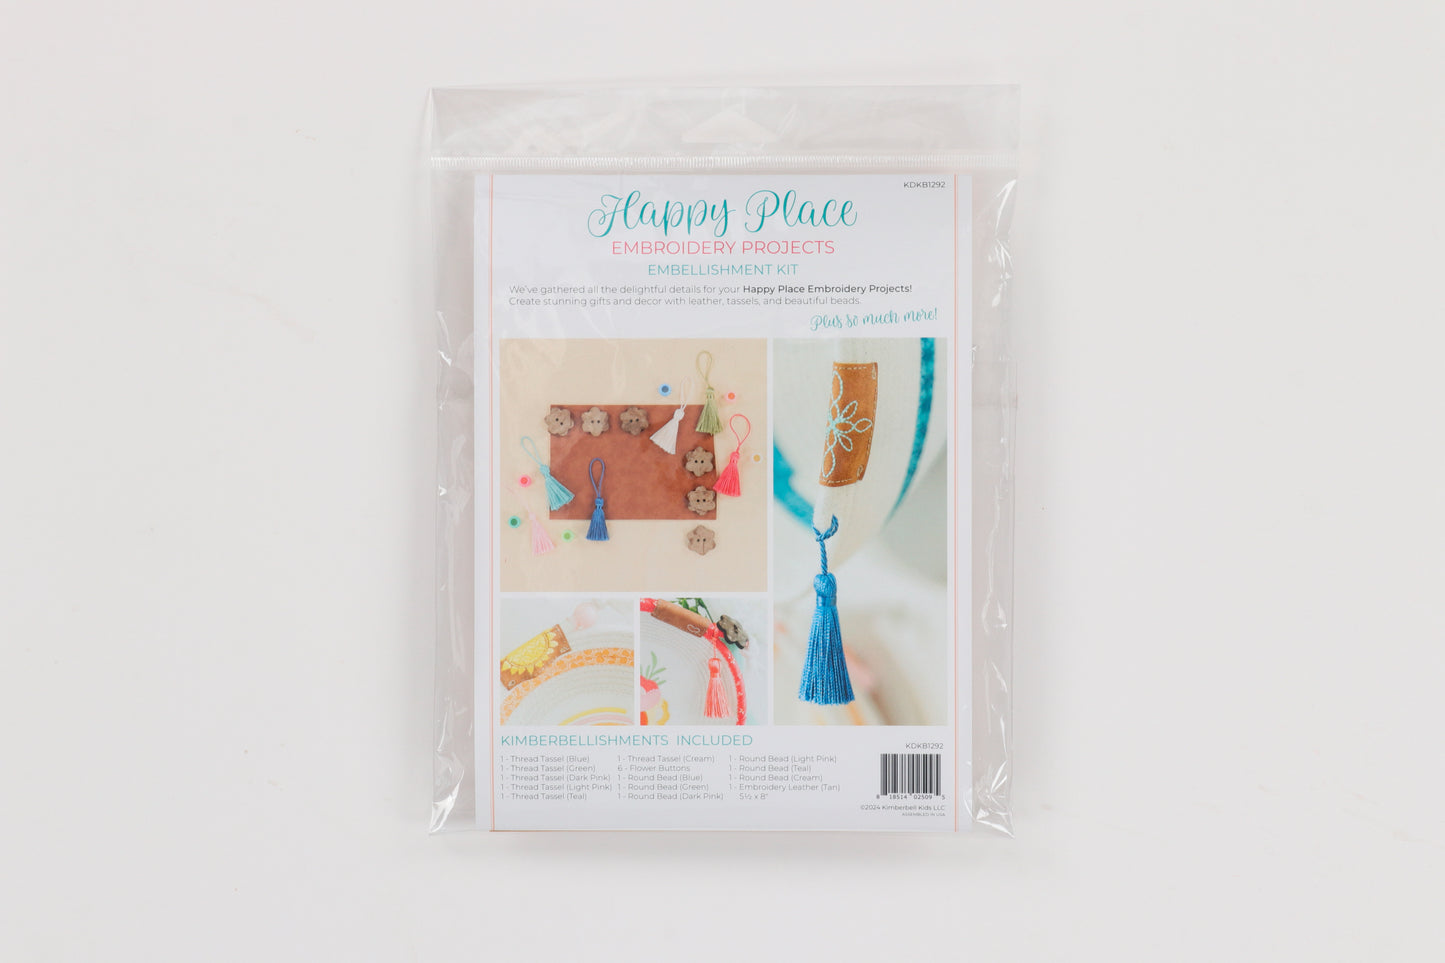 With the Happy Place Embroidery Projects Embellishment Kit (KDKB1292), create stunning gifts and decor with leather, tassels, and beautiful beads! Photo shows the back of the package.